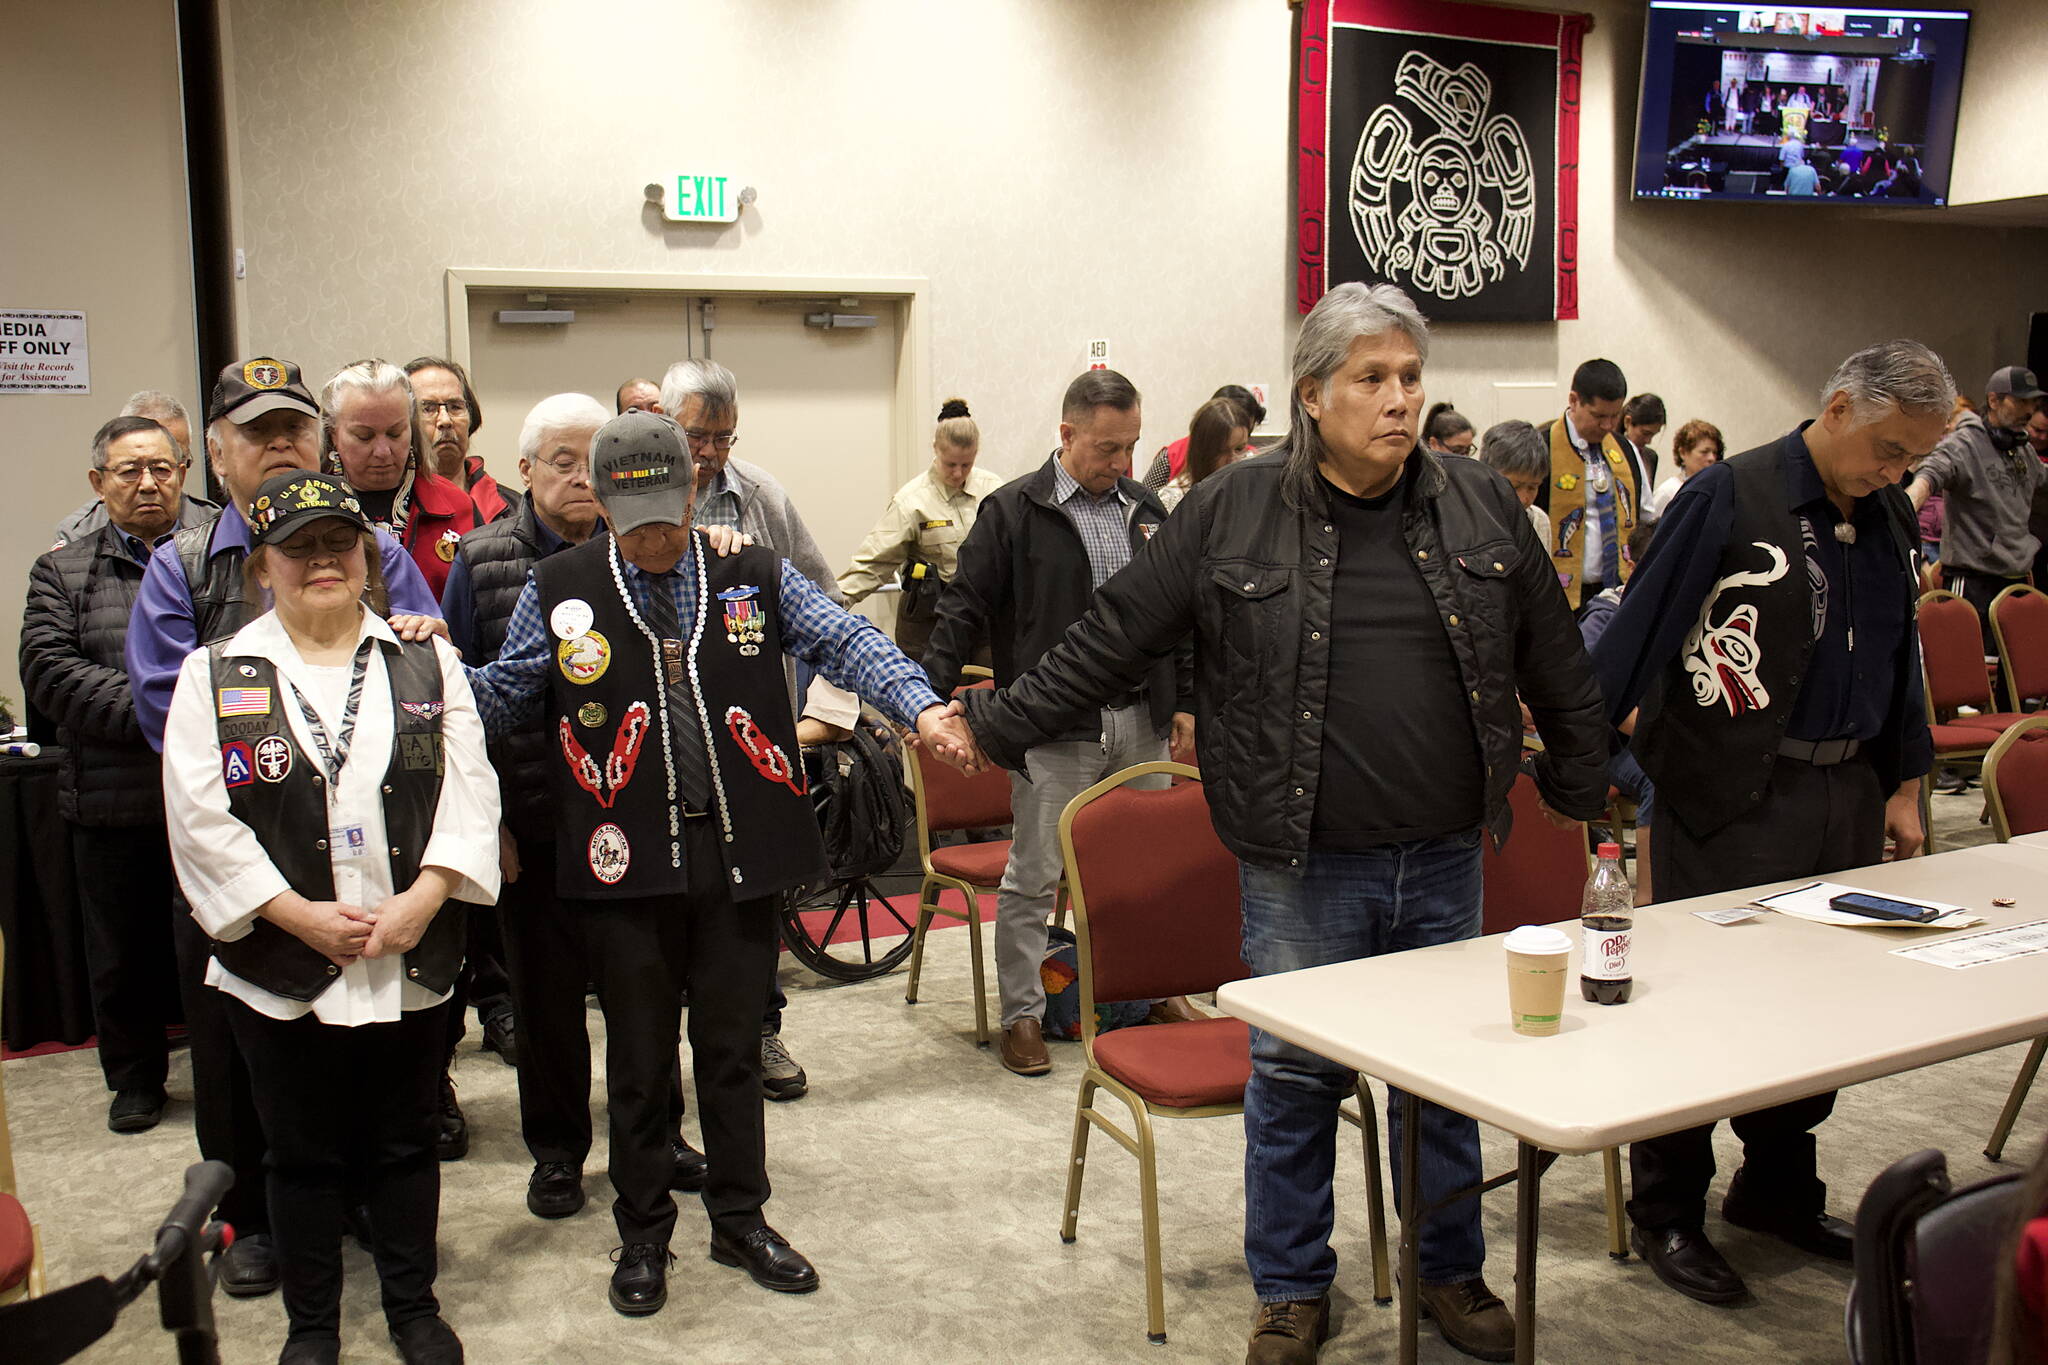 Southeast Alaska Native Veterans join hands in prayer for three employees of the Central Council of the Tlingit and Haida Indian Tribes of Alaska who were caught in an avalanche while driving from Whitehorse, Yukon Territory, to Skagway on during the 88th annual tribal assembly Friday. According to tribal officials the employees are safe, but little else was known Friday afternoon about the incident. (Mark Sabbatini / Juneau Empire)